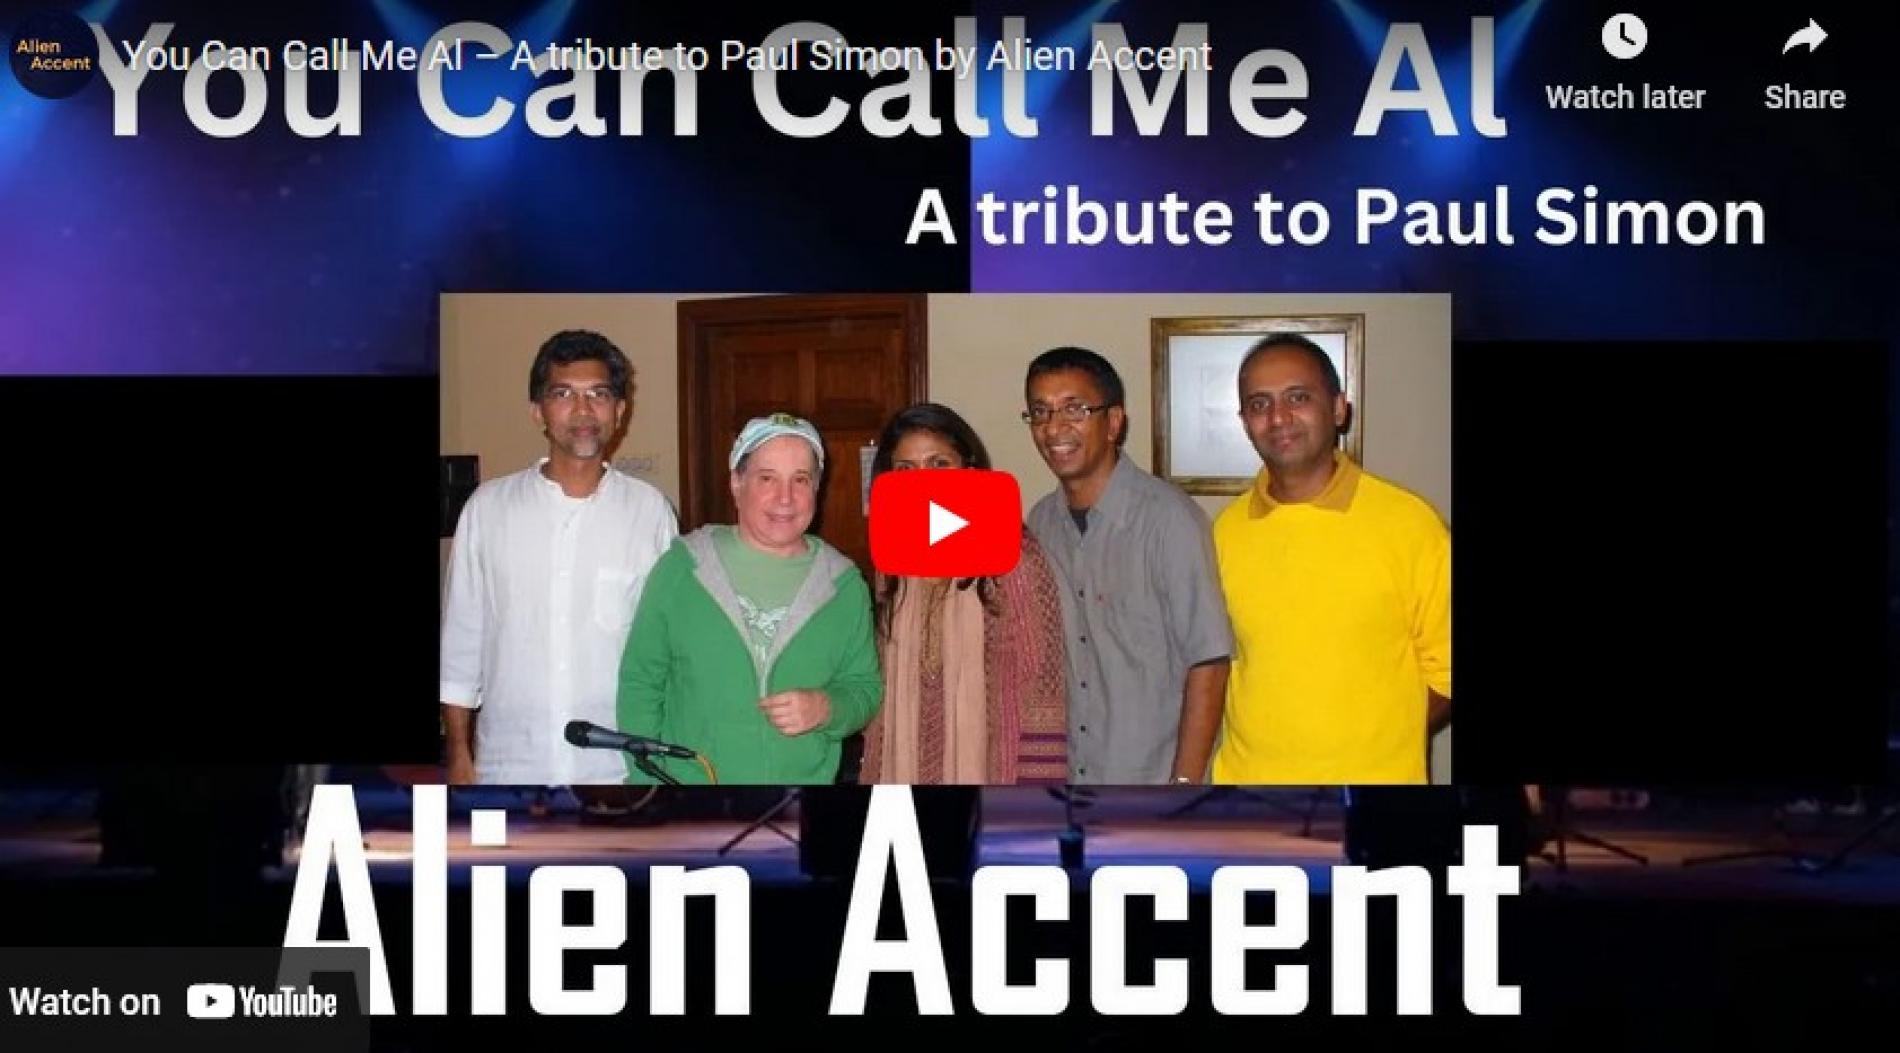 You Can Call Me Al – A Tribute To Paul Simon By Alien Accent